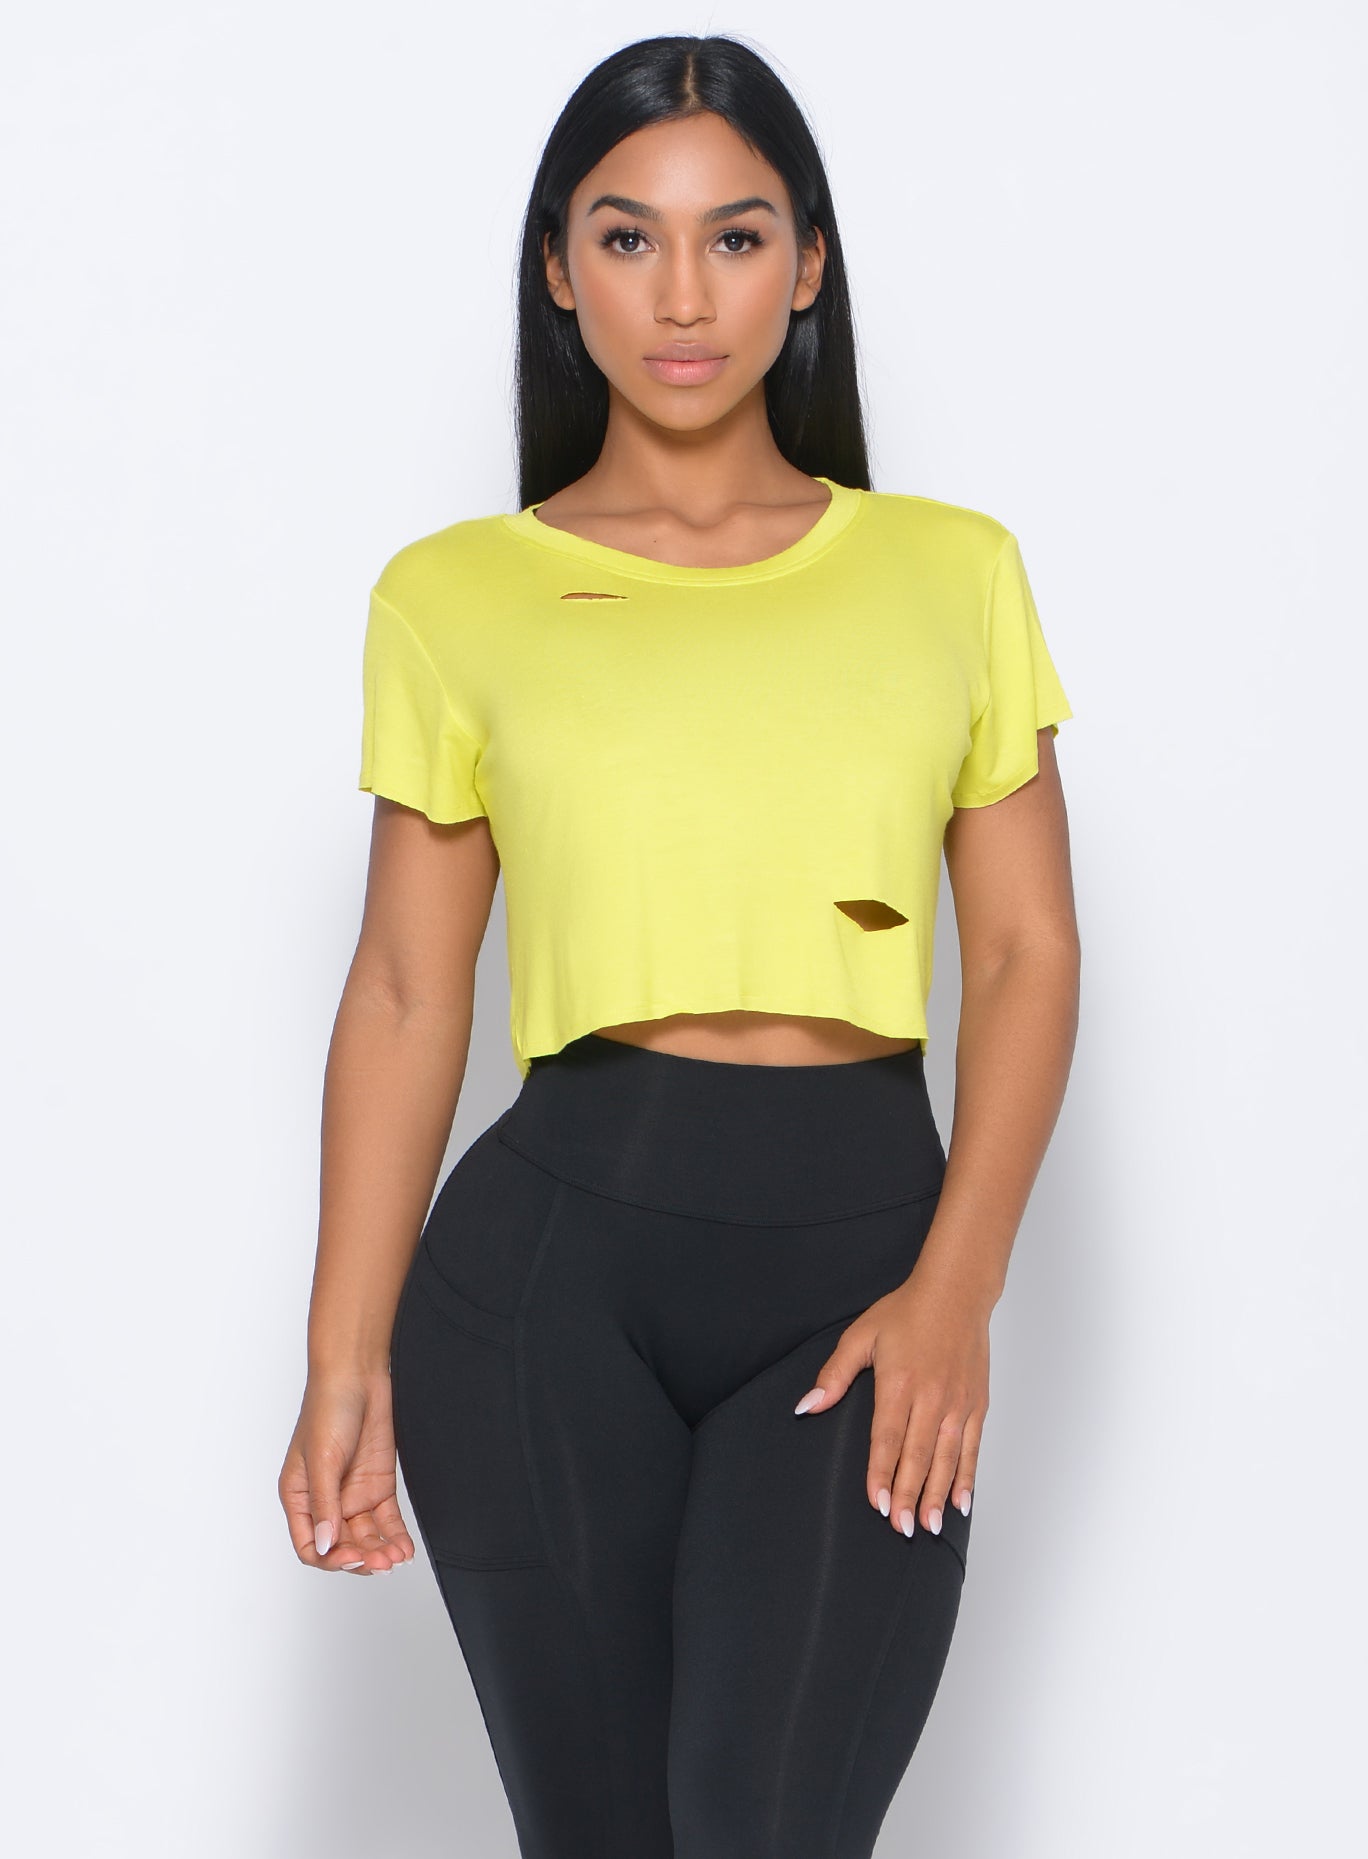 Front profile  view of the model wearing our shredded tee in neon yellow and a black leggings